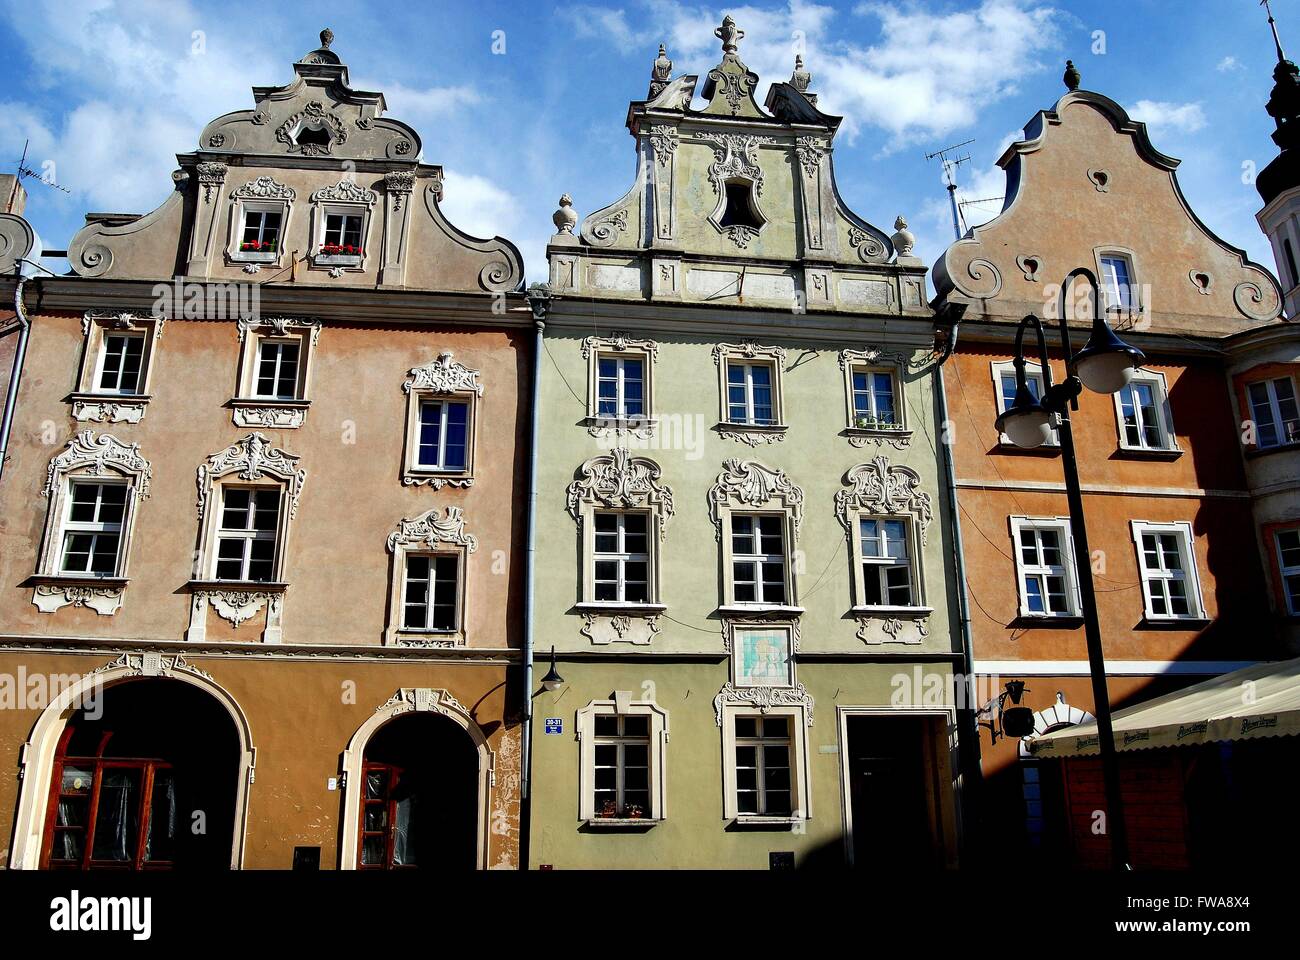 Opole, Poland:  18th century baroque burgher's mansions in the Rynek Market Square Stock Photo